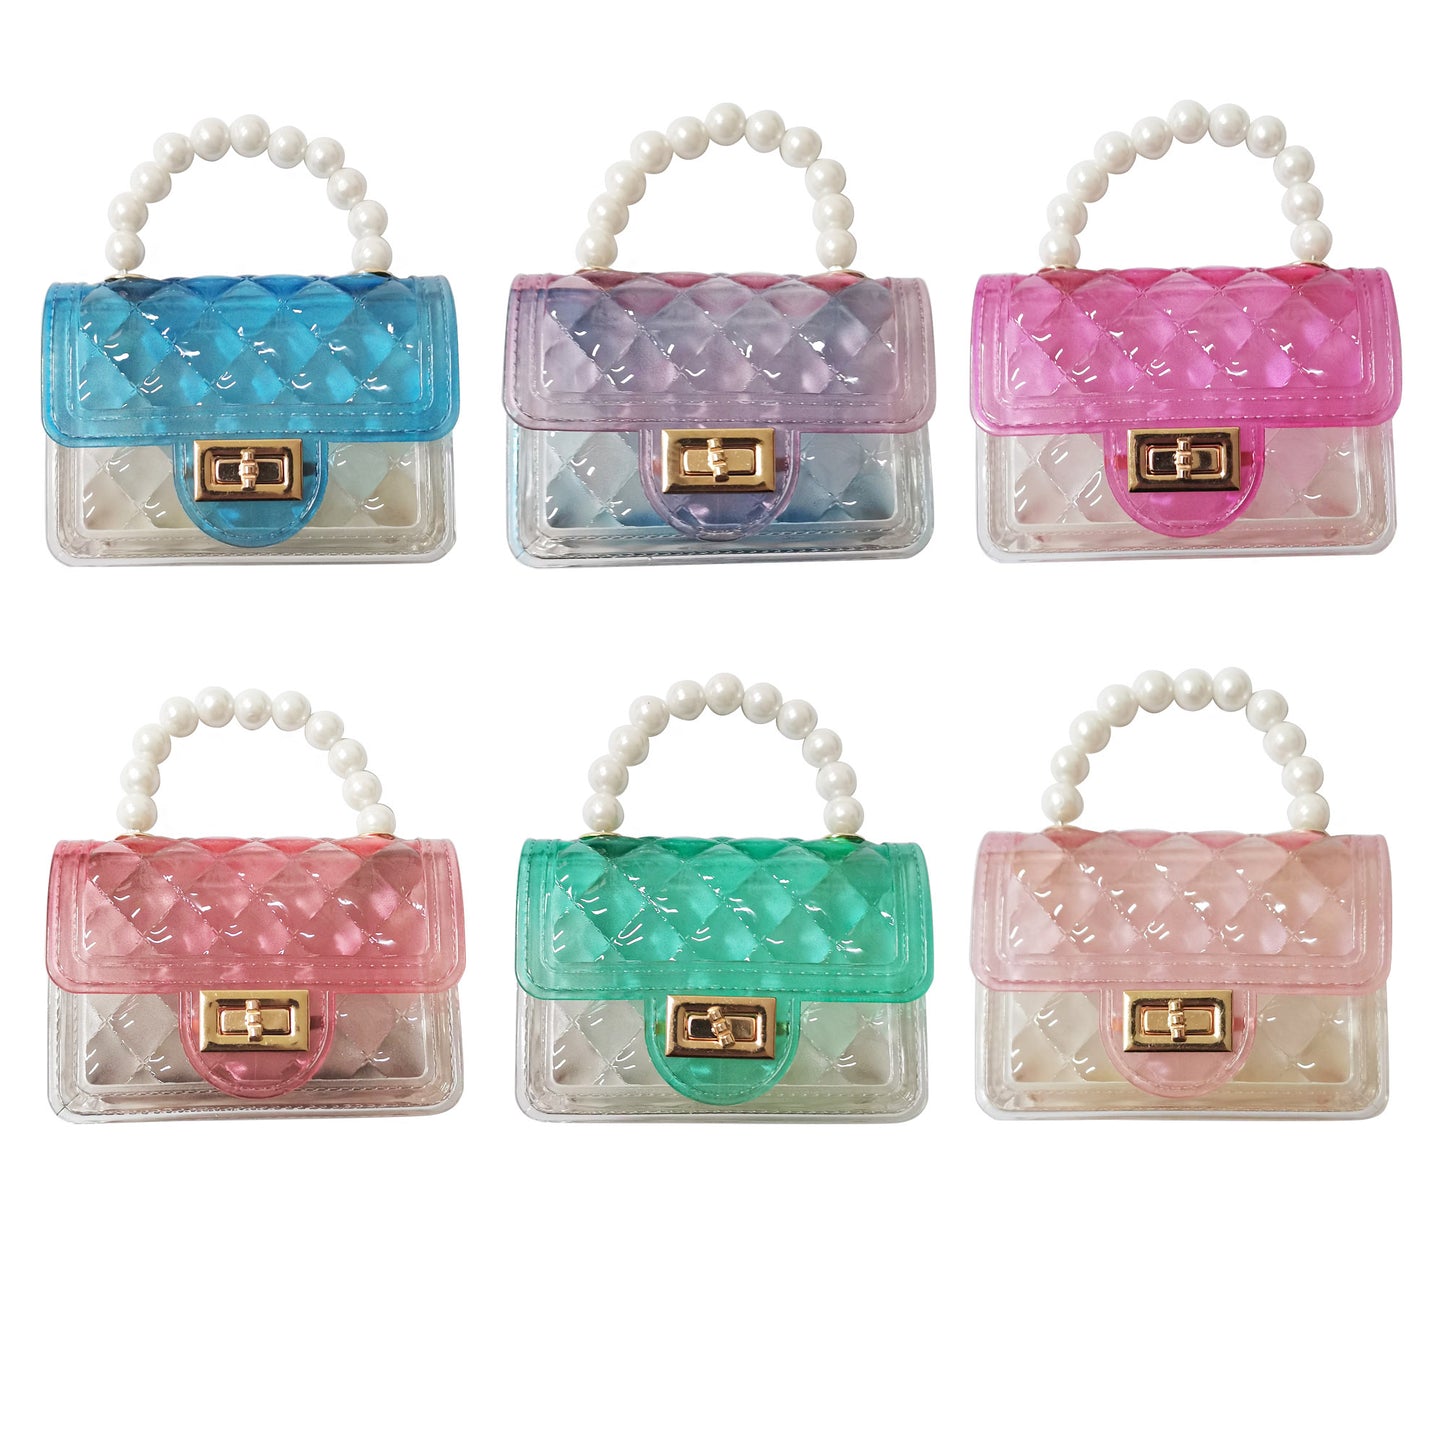 CLEAR QUILTED MINI JELLY PURSE 3113-62 (12PC)